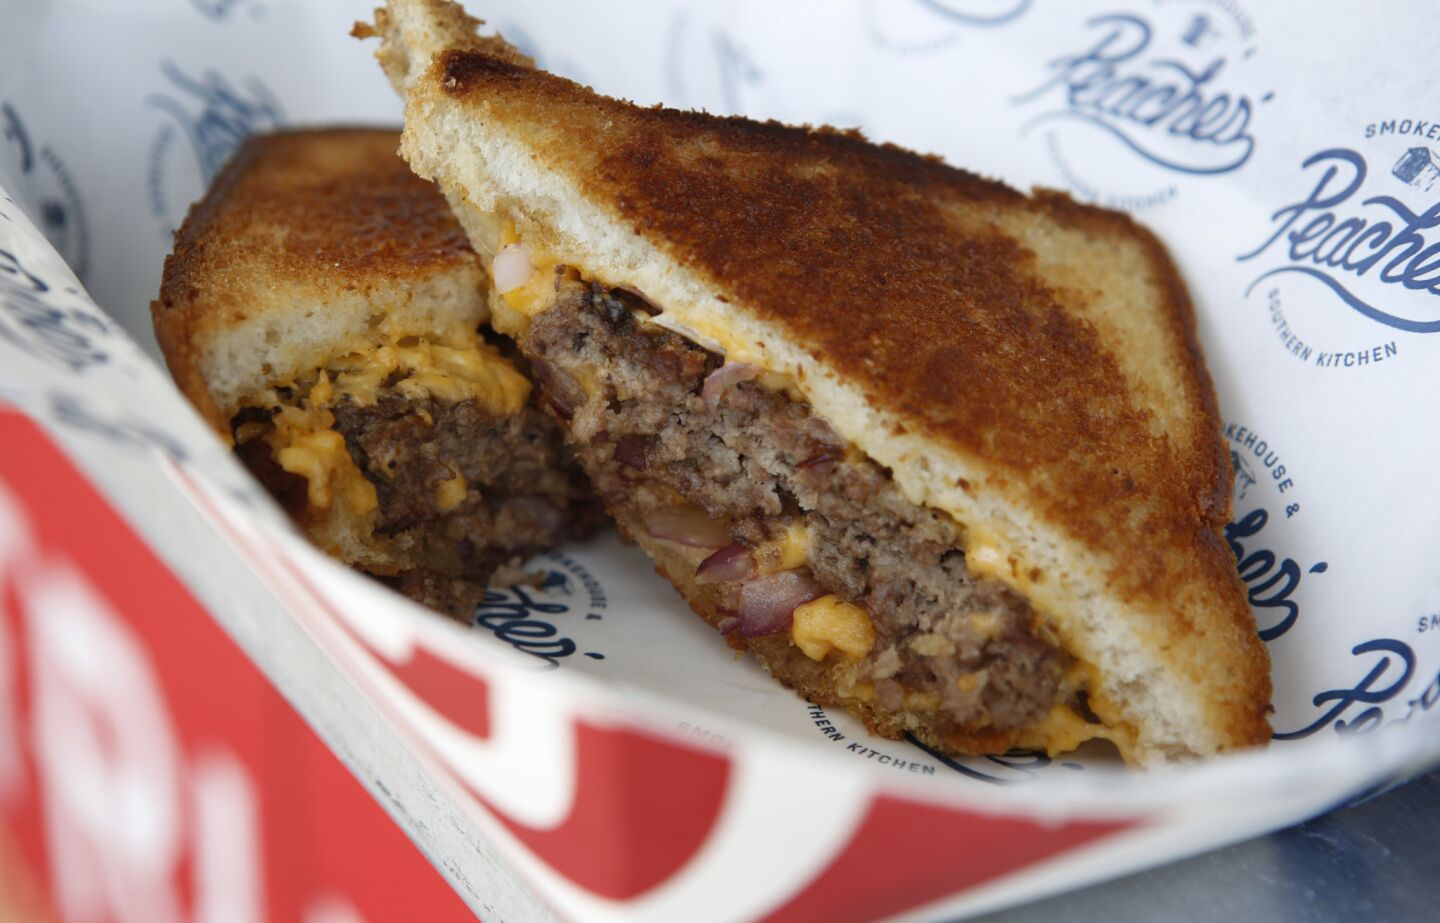 The patty melt at Peaches', a food truck specializing in Southern food.